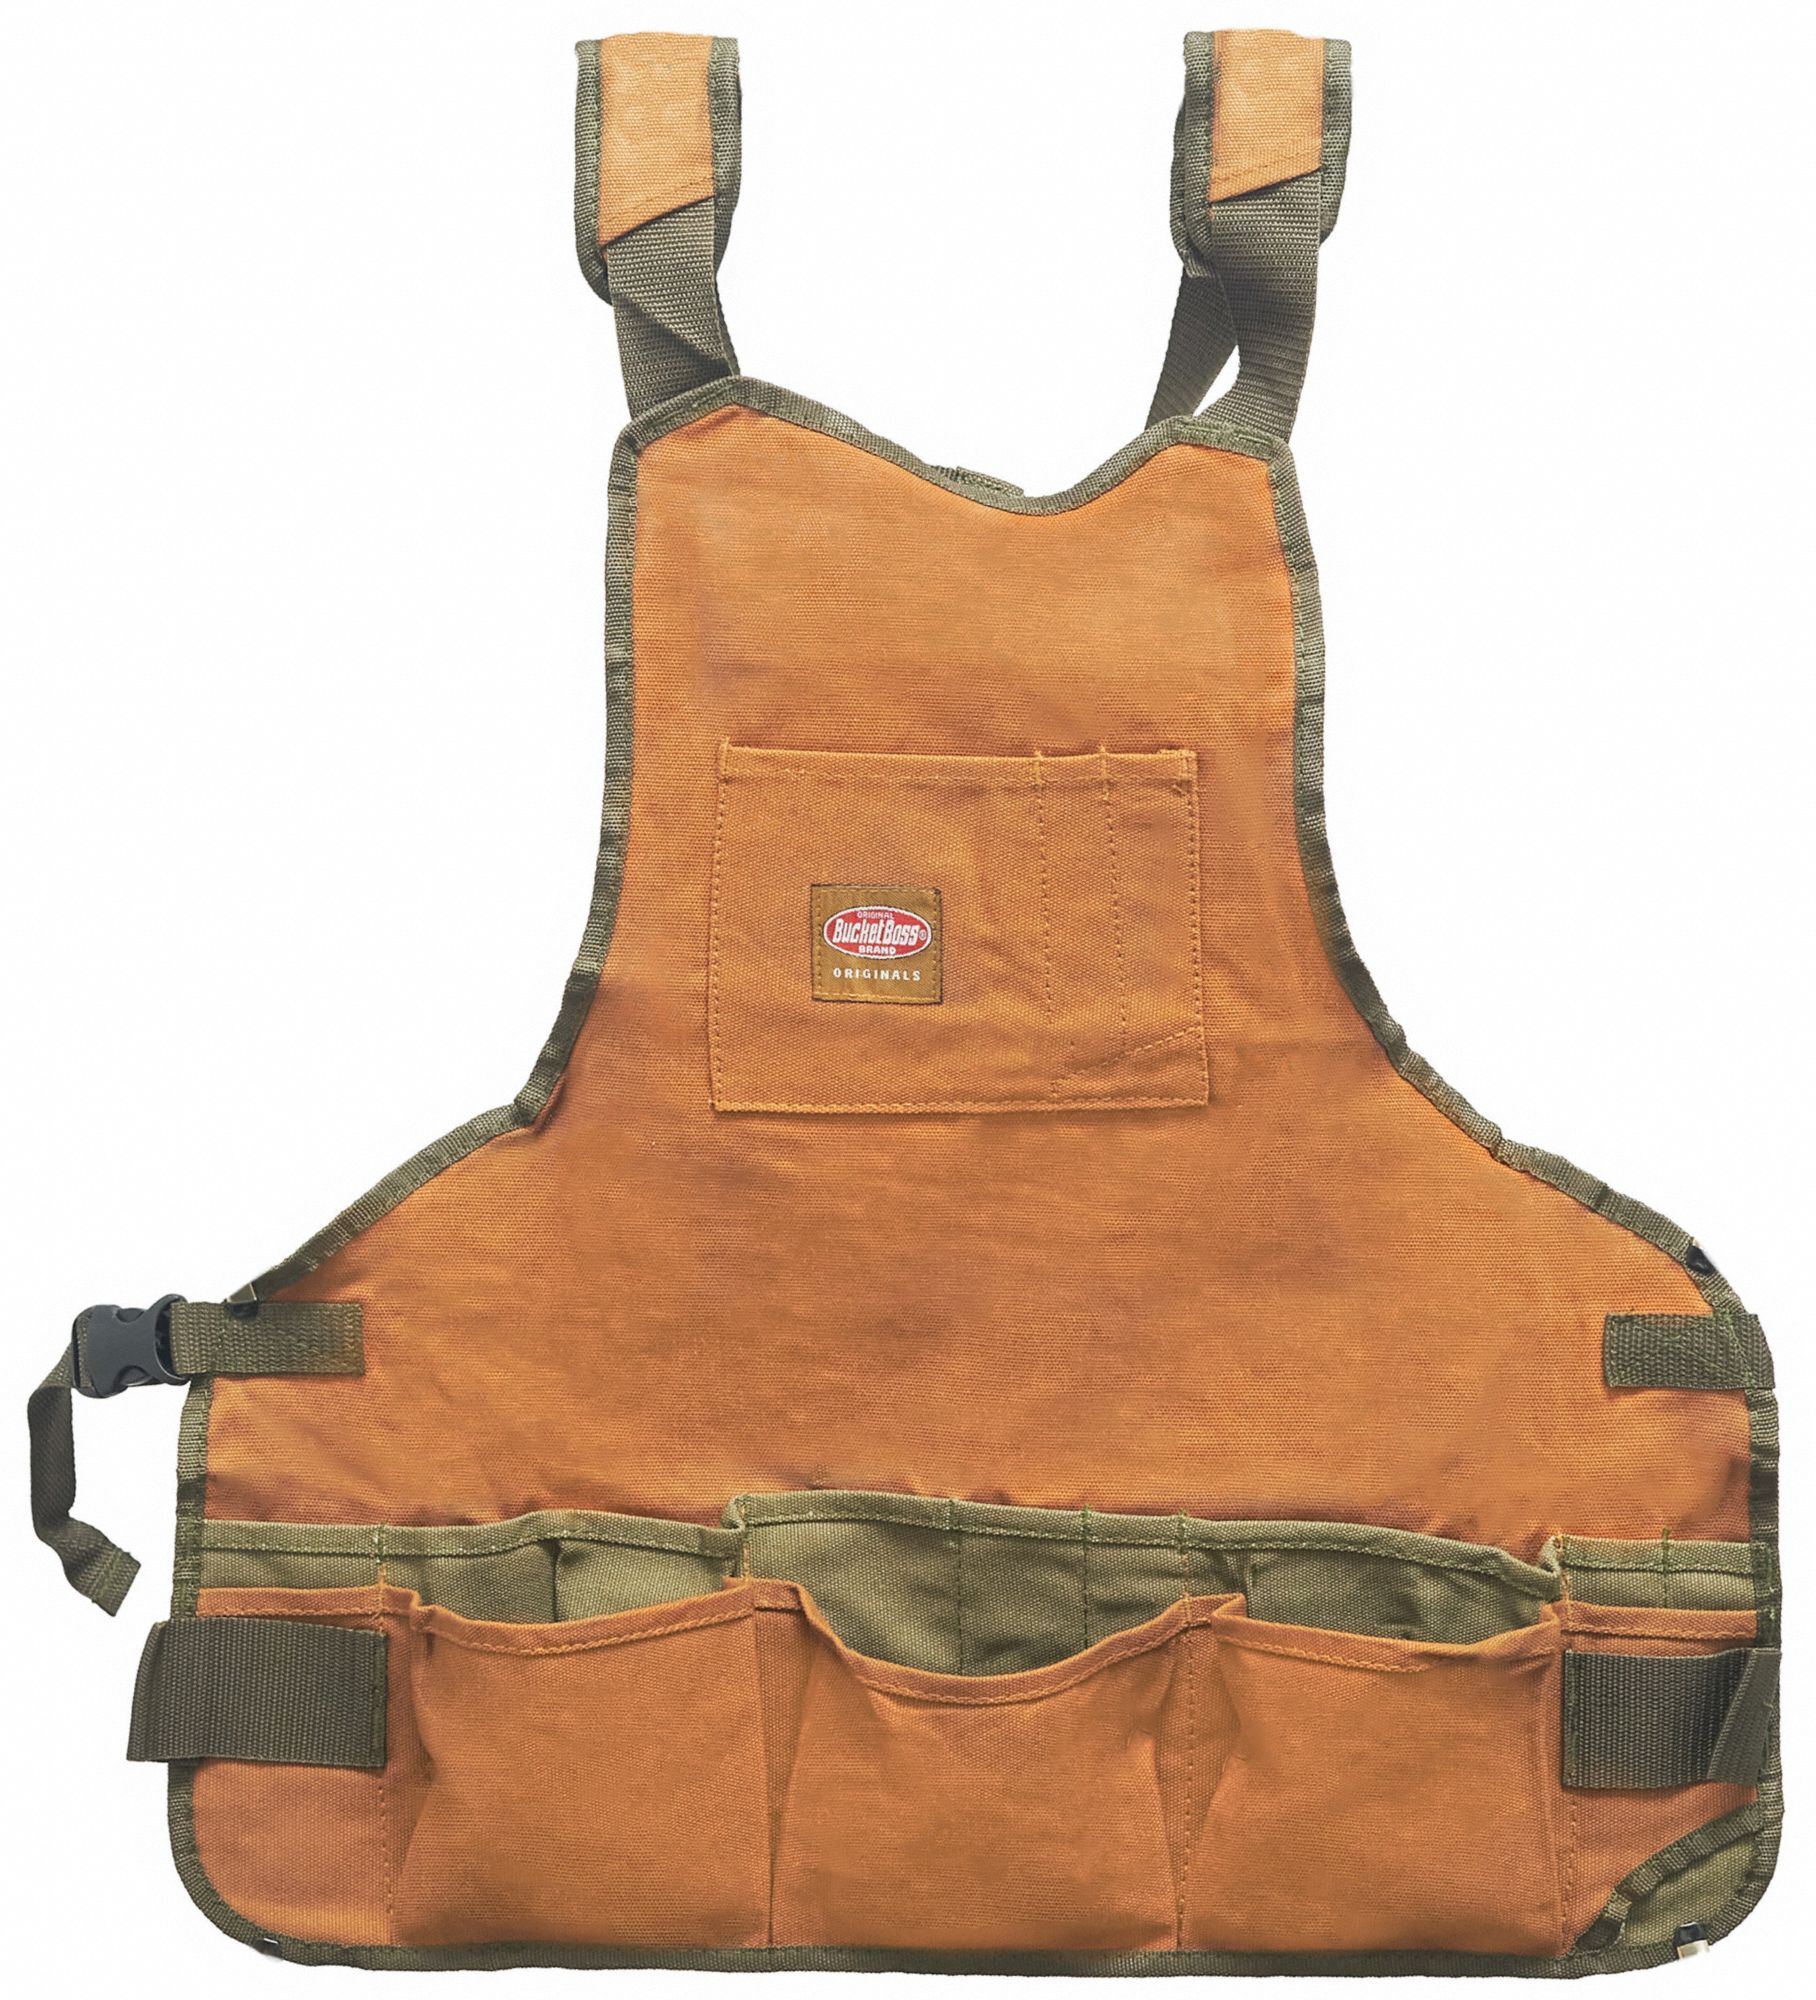 Tool Apron: Canvas, Carpentry, 16 Pockets, Padded, Up to 52 in Waist Size